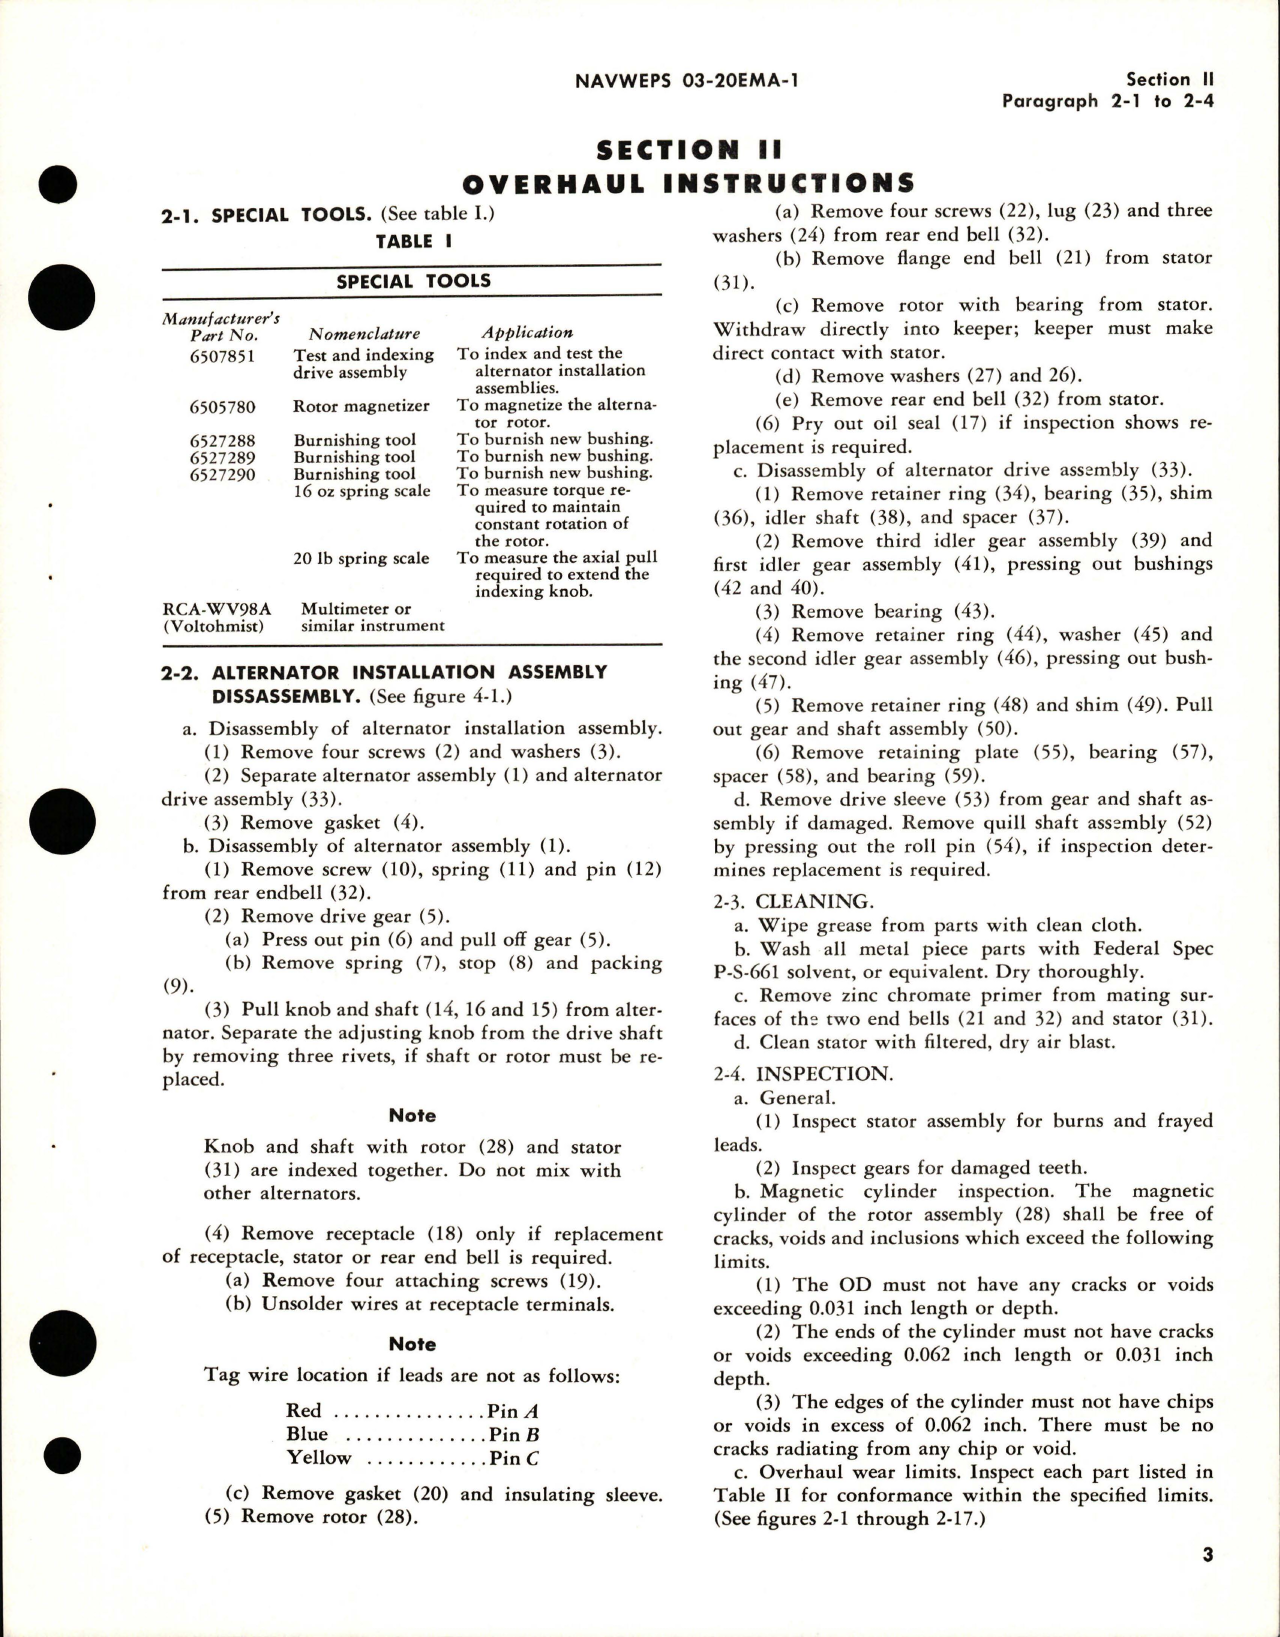 Sample page 7 from AirCorps Library document: Overhaul Instructions with Parts Breakdown for Alternator Installation Assembly - 6505555